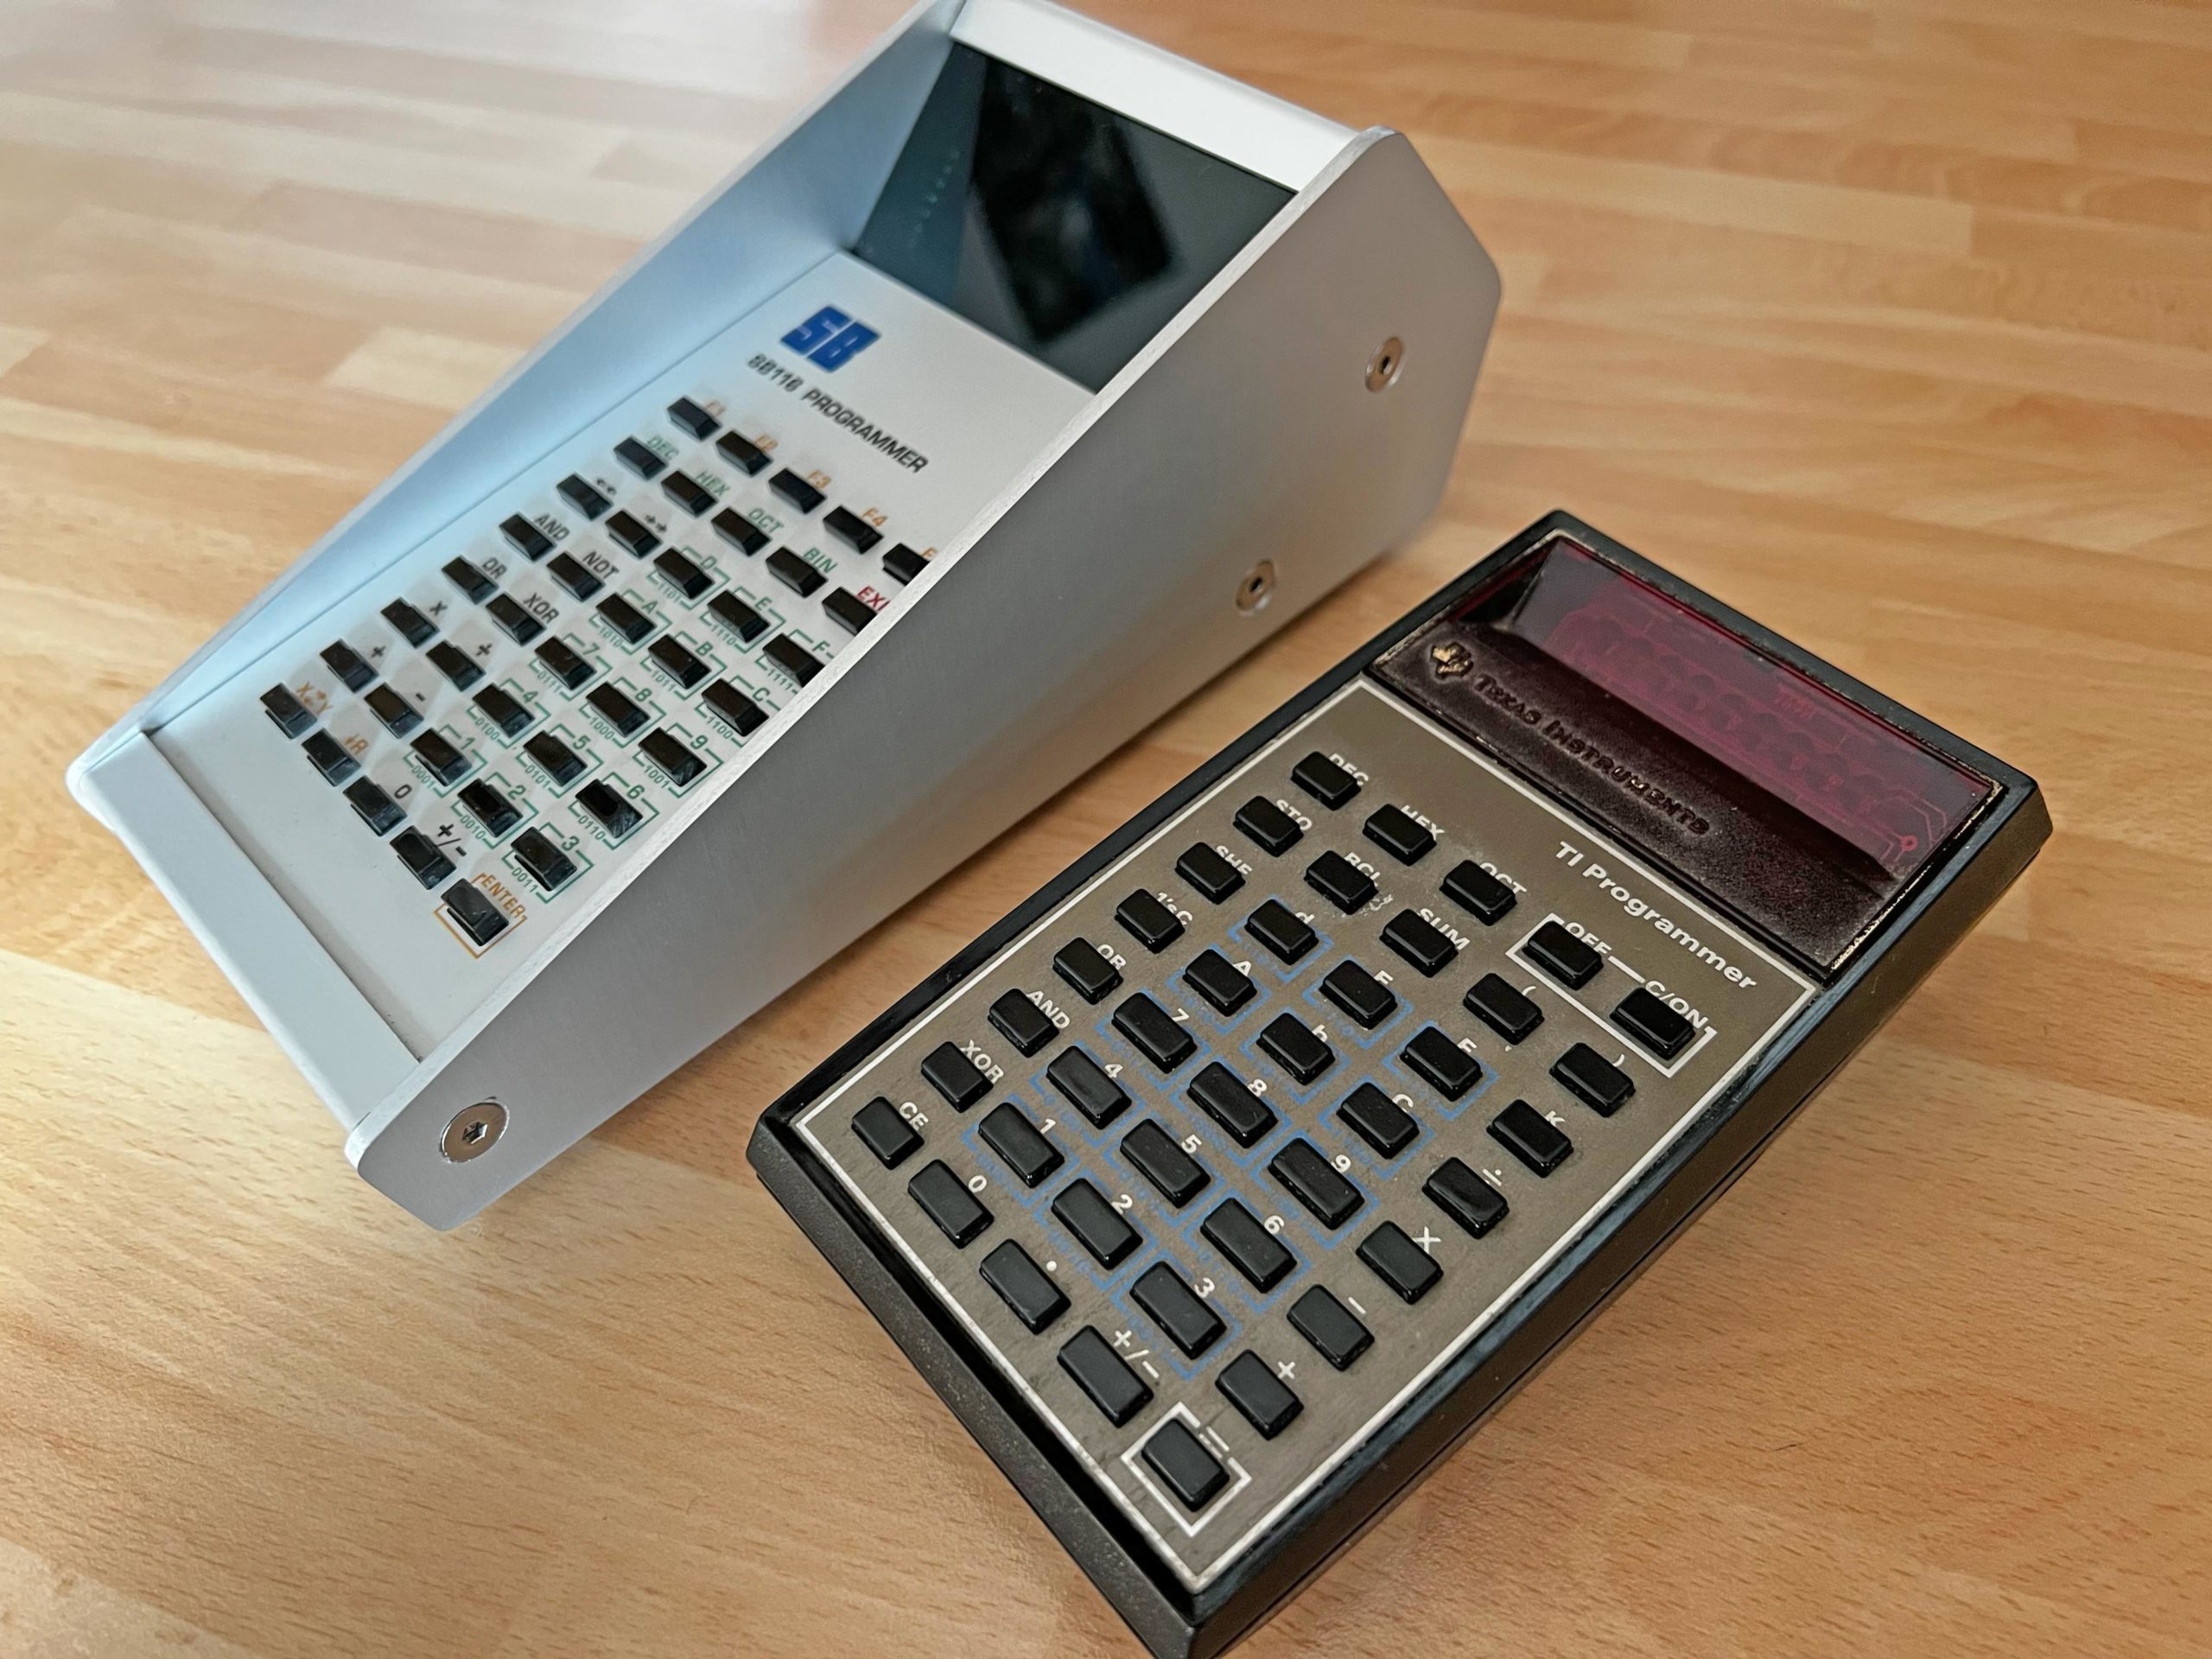 Simon Boak's SB116 is a DIY calculator inspired by the TI programmer